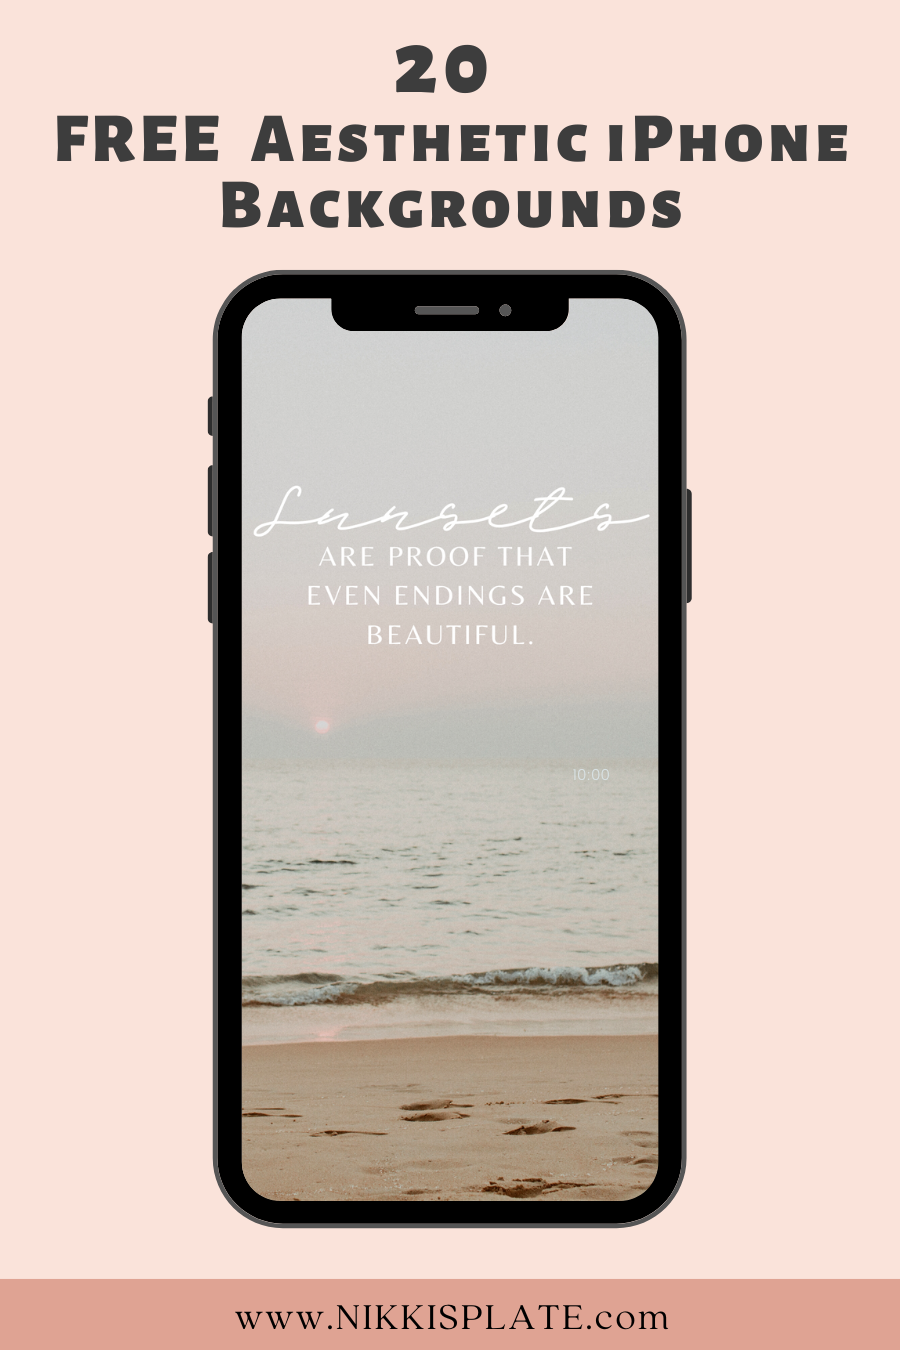 Cute aesthetic iphone backgrounds free